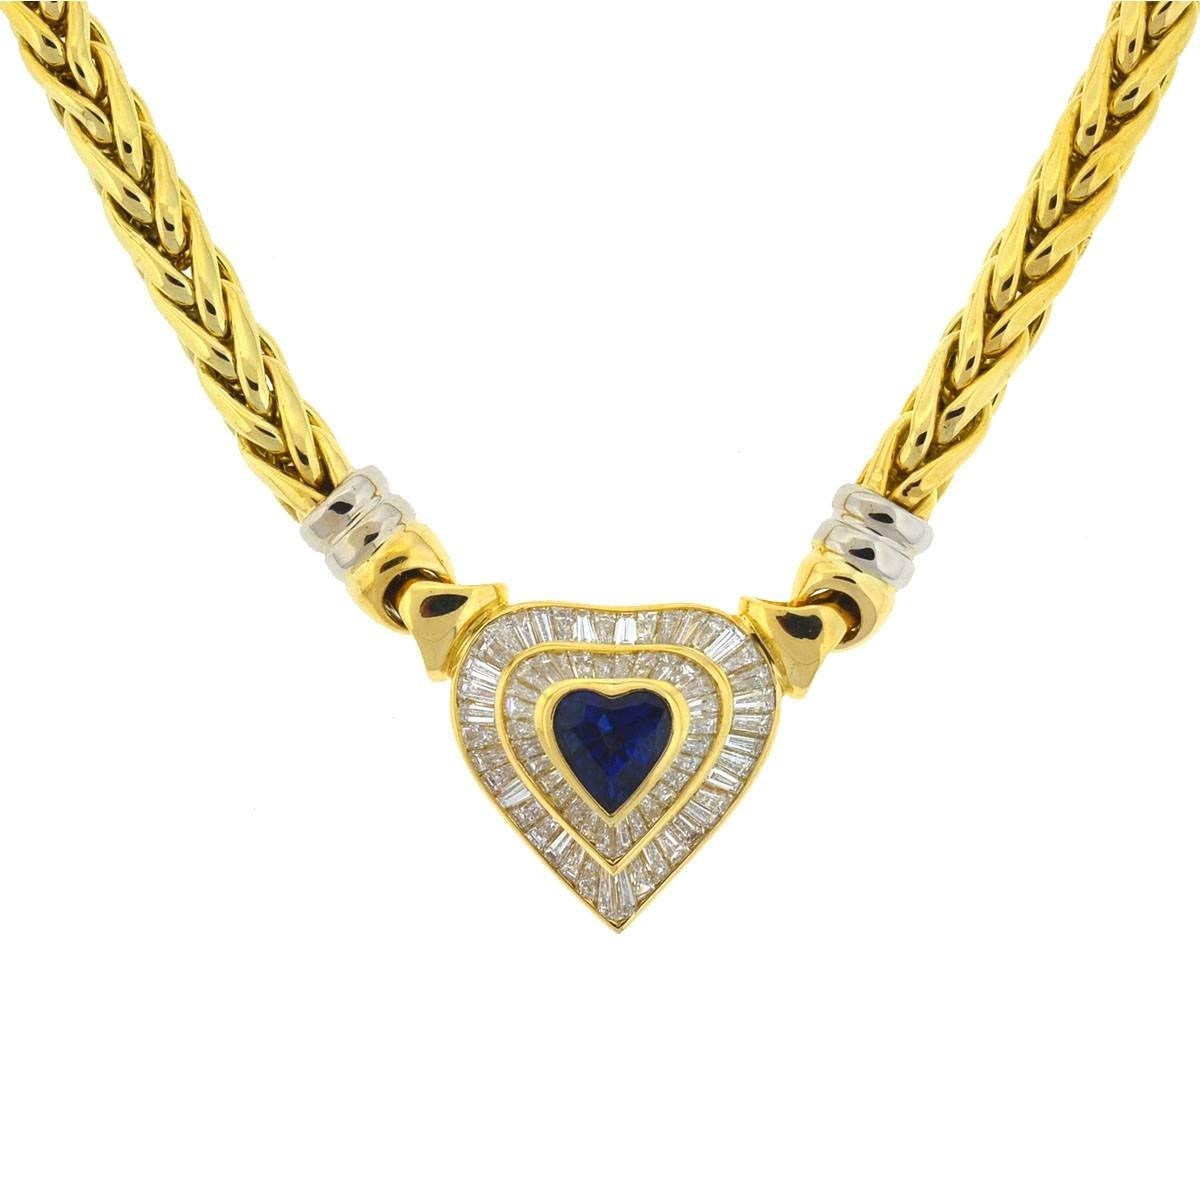 Style - Choker / Pendant
Meta l- 18k Yellow Gold
Weight - 59.7 Grams
Chain Length - 16"
Stones  - Diamonds (approx. 3.02cts) Sapphire (approx. 2.2cts)
Includes - Necklace only